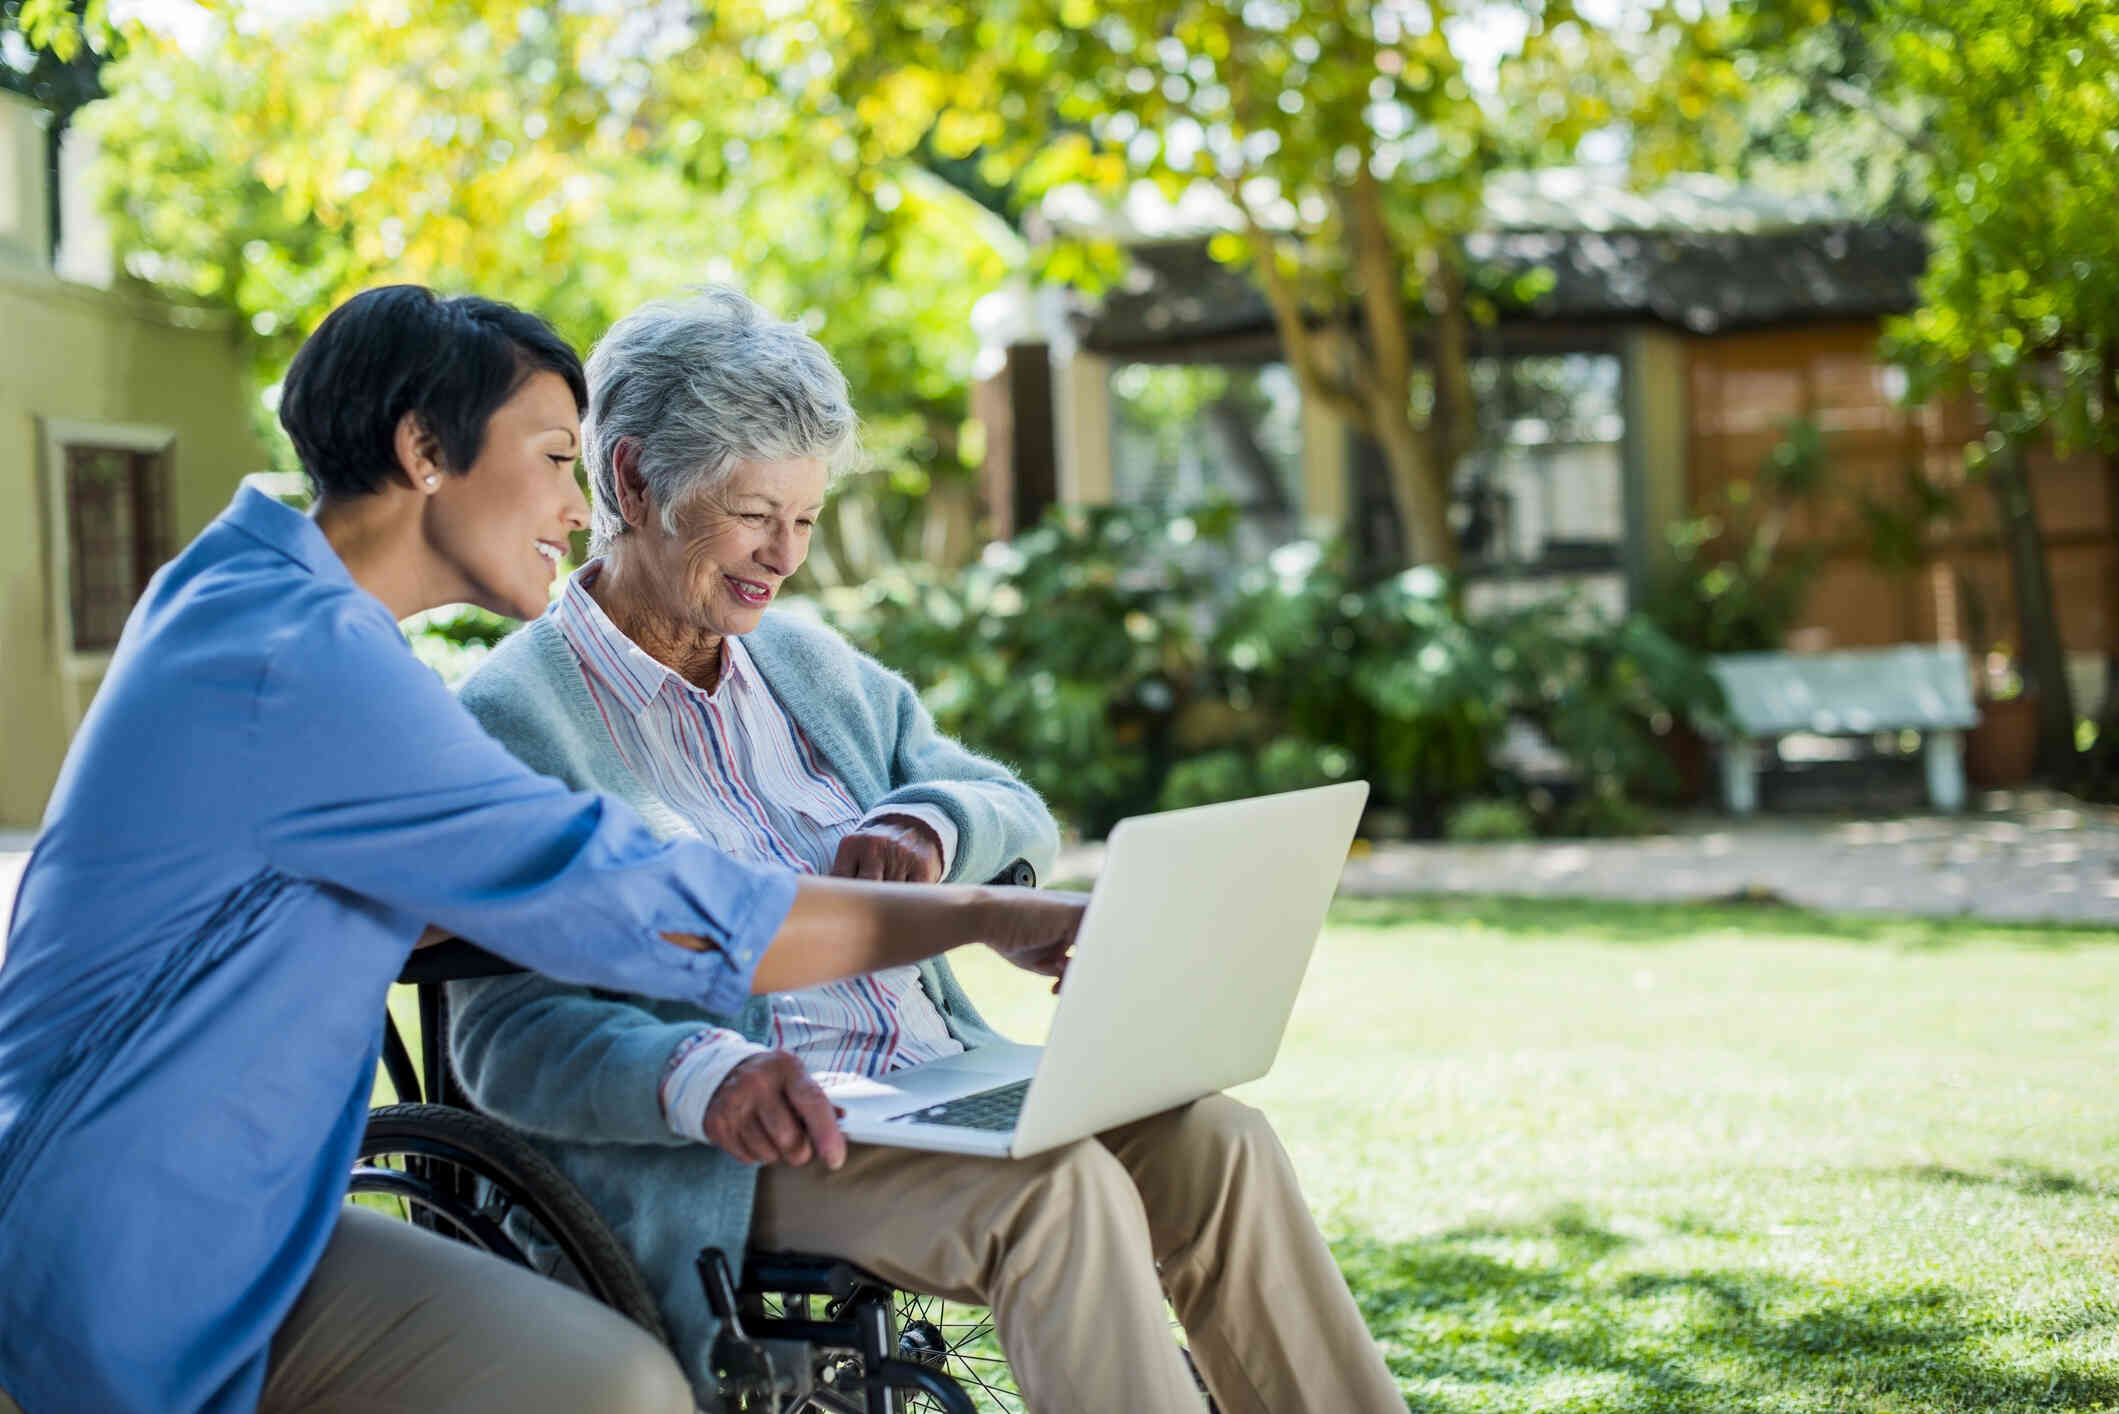 An elderly woman in a wheelchair sits outside with a laptop open in his lap as a woman next to her points to some information on the screen.